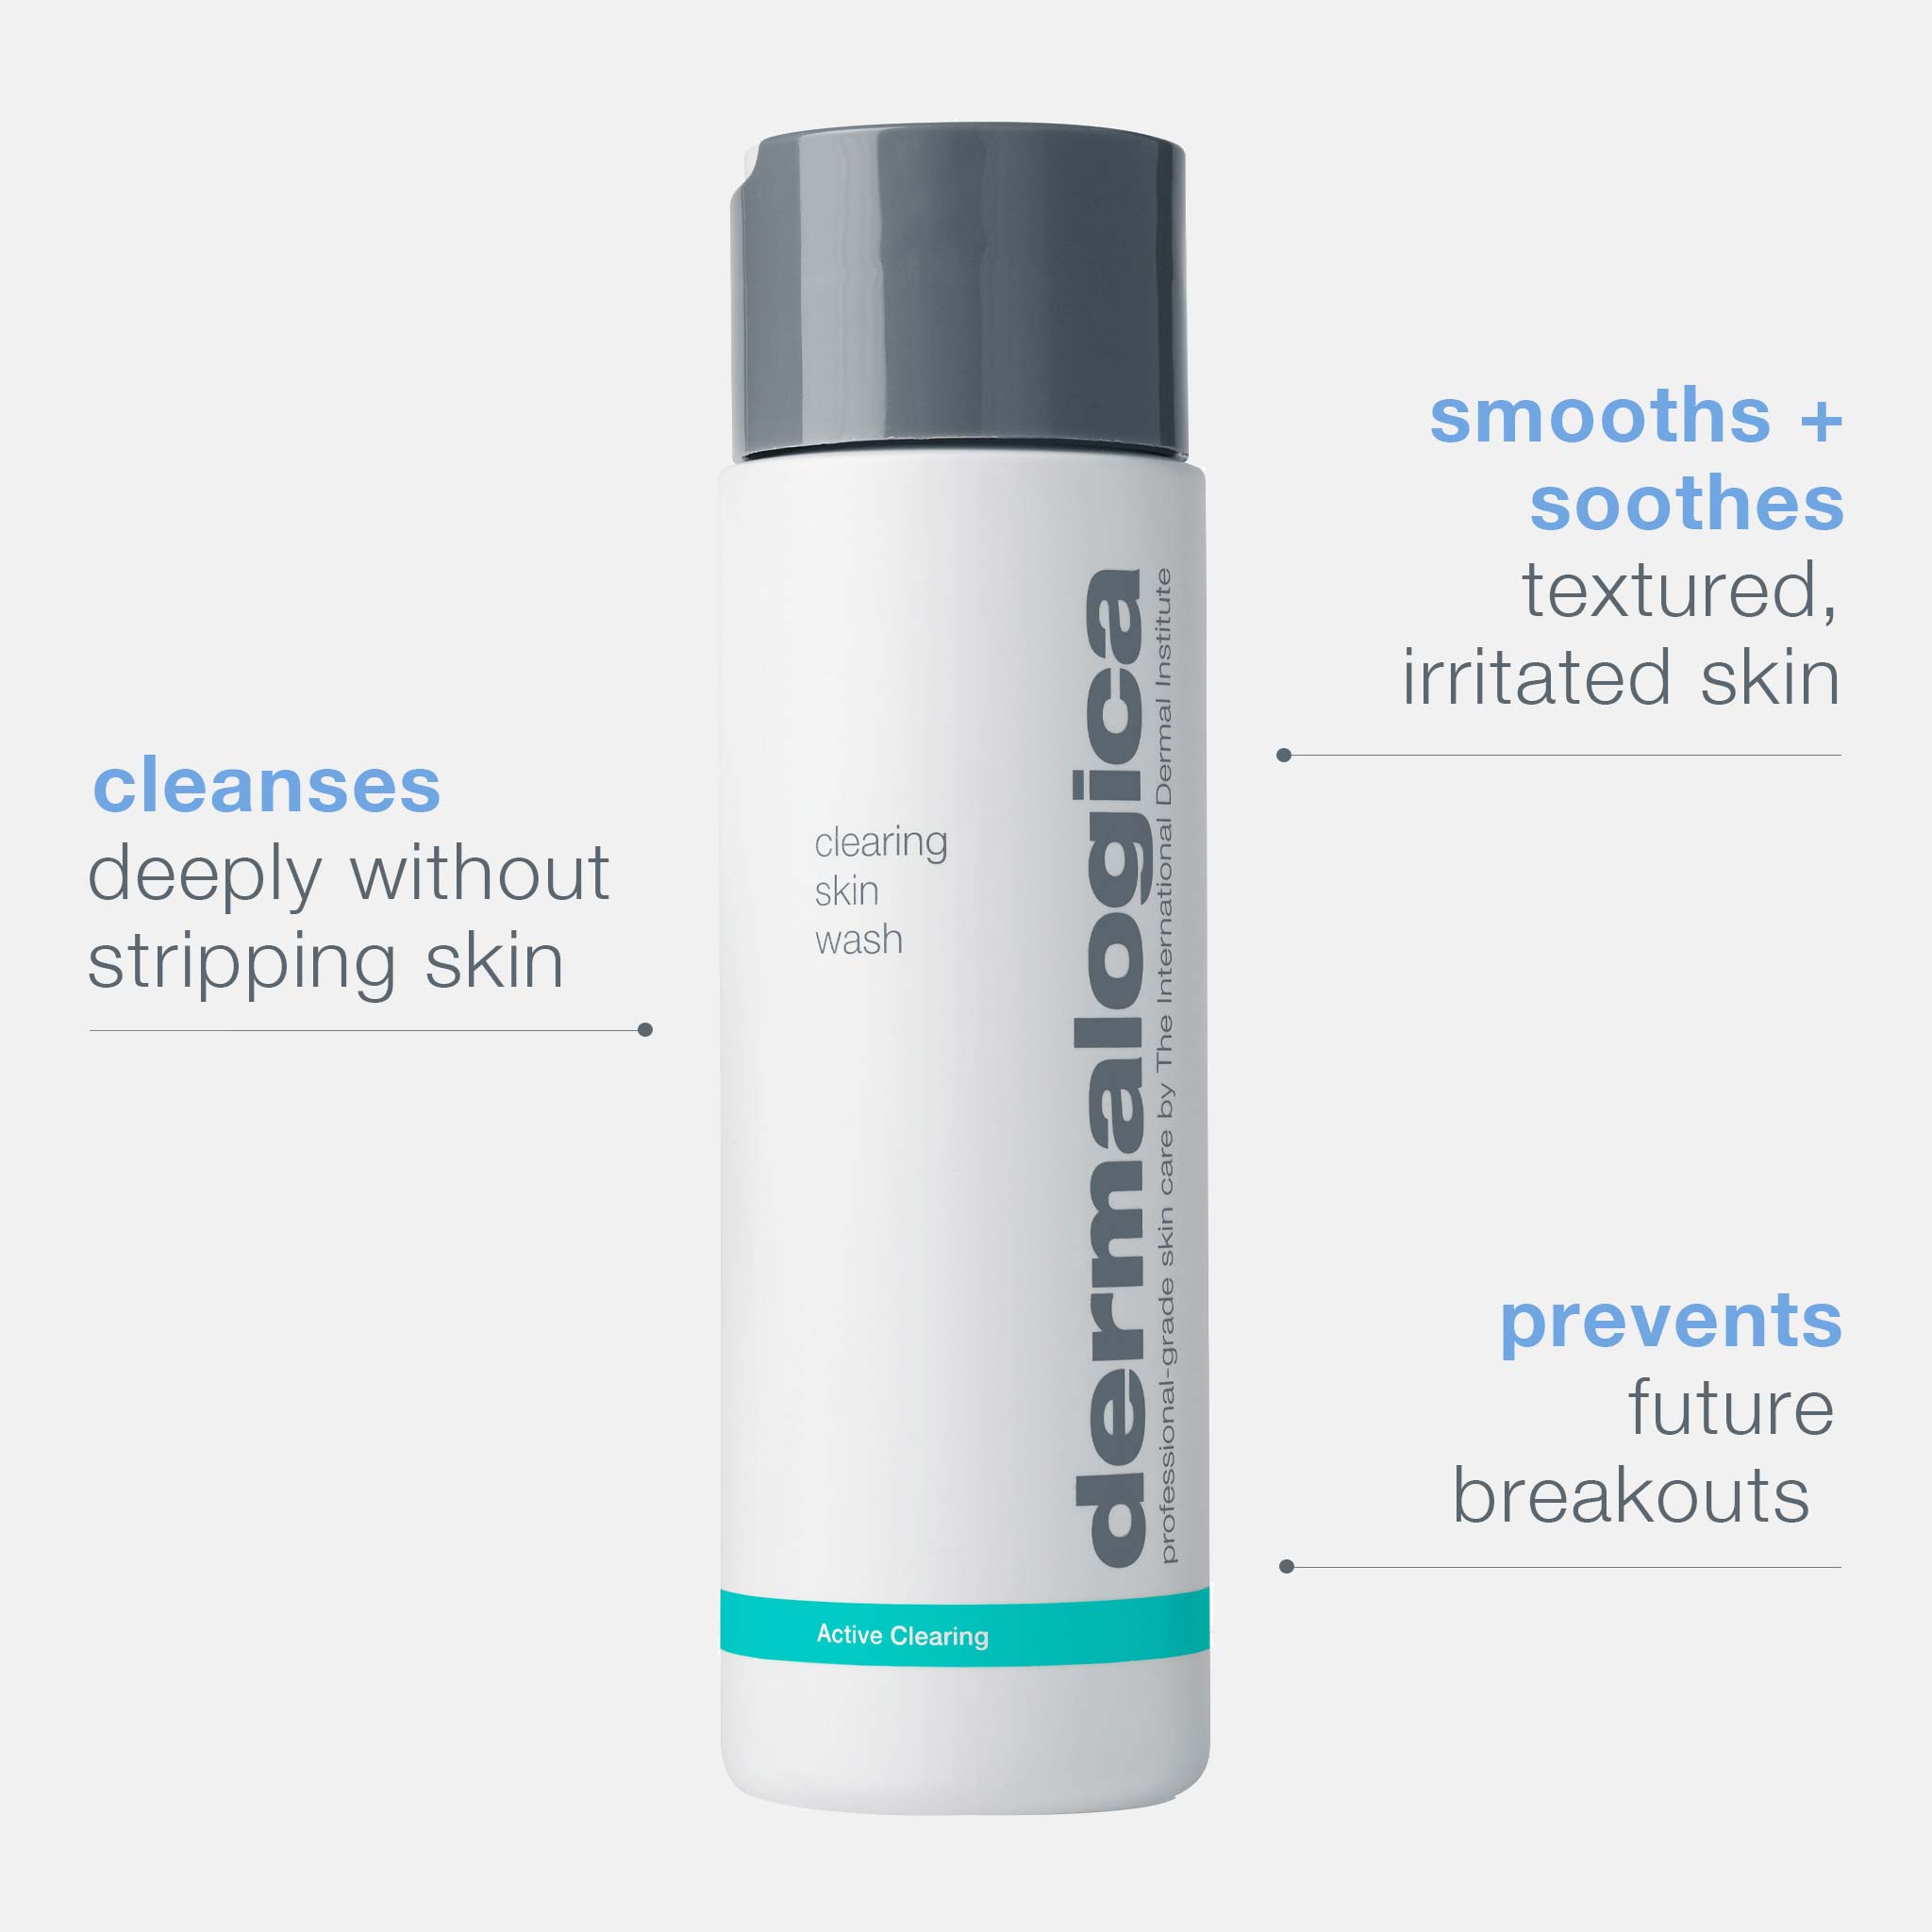 Dermalogica Clearing Skin Wash - Anti-Aging Acne Face Wash - Natural Breakout Clearing Foam with Salicylic Acid and Tea Tree Oil 16.9 Fl Oz (Pack of 1)